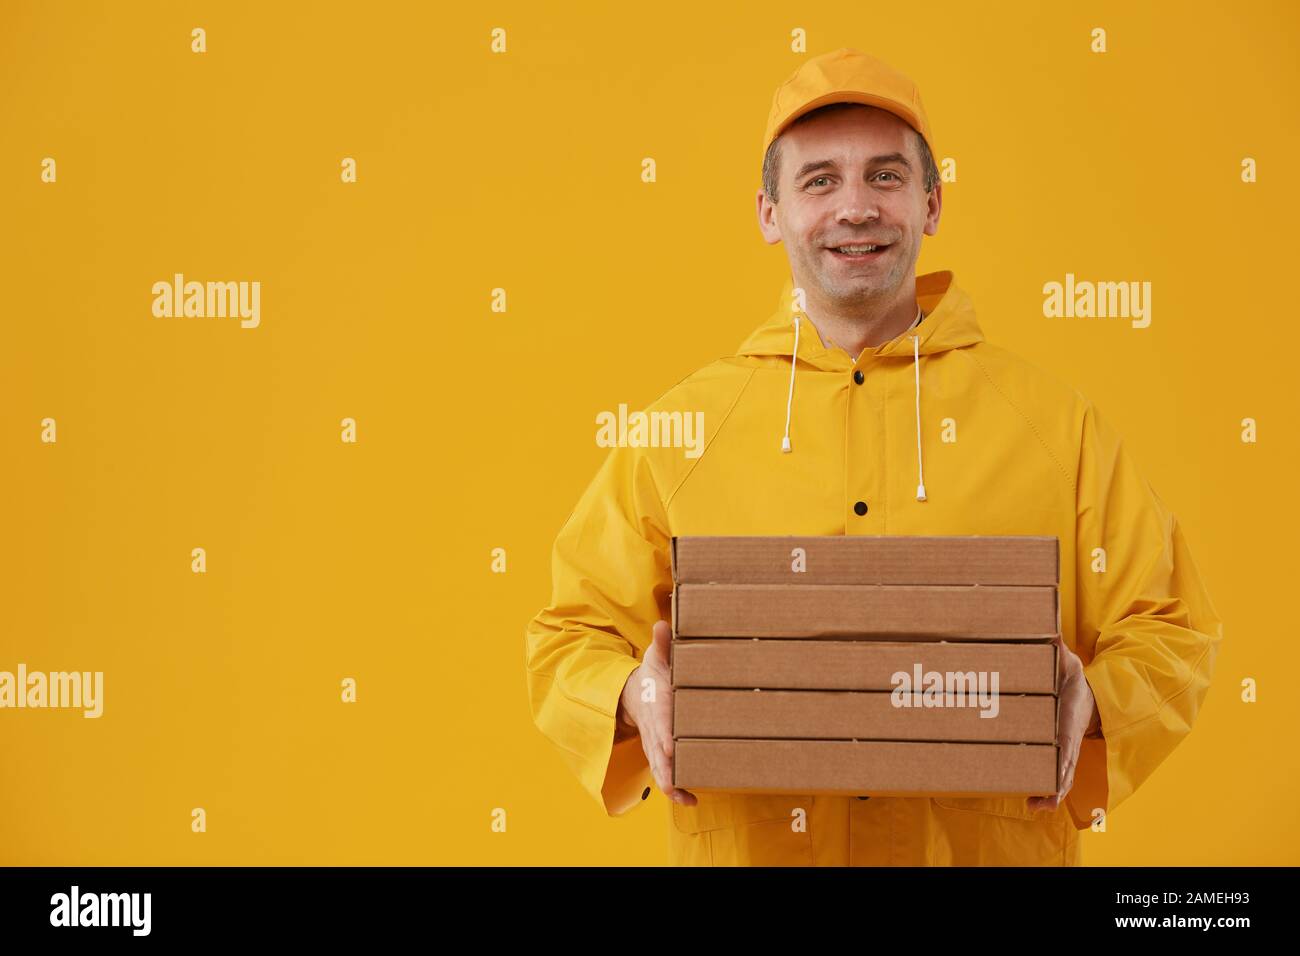 Waist up portrait of adult delivery man holding pizza boxes and smiling at camera while standing against pop yellow background, copy space Stock Photo